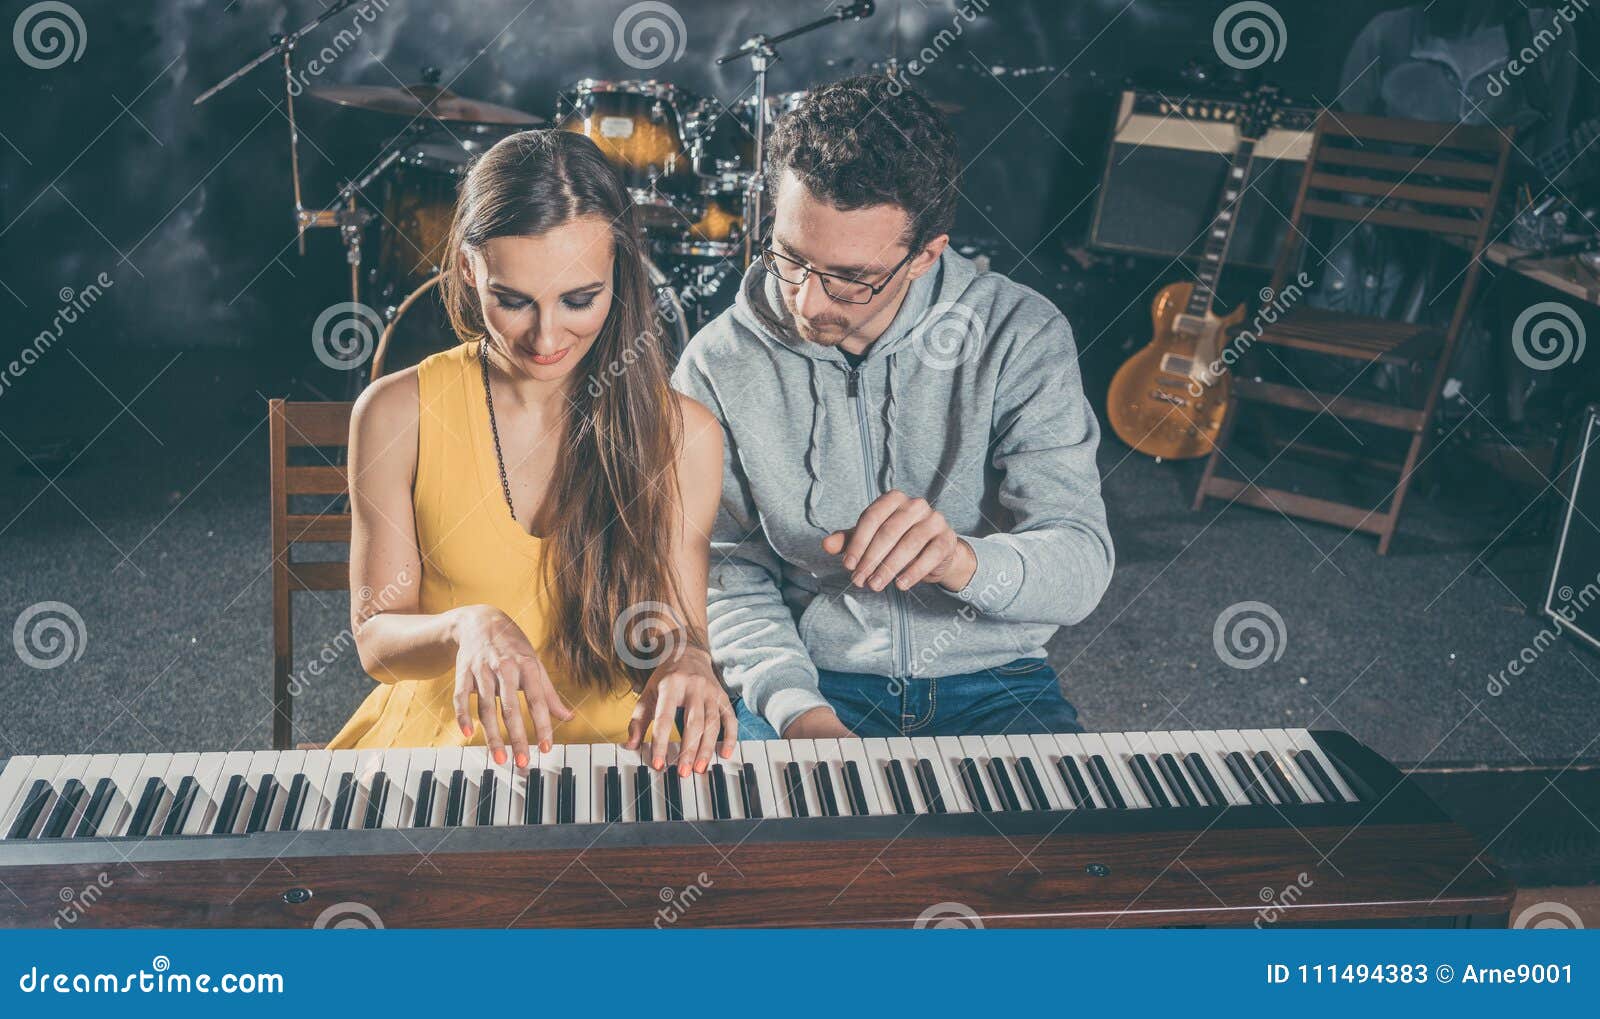 Piano Teacher Giving Music Lessons To His Student Stock Image Image Of Adult Musician 111494383